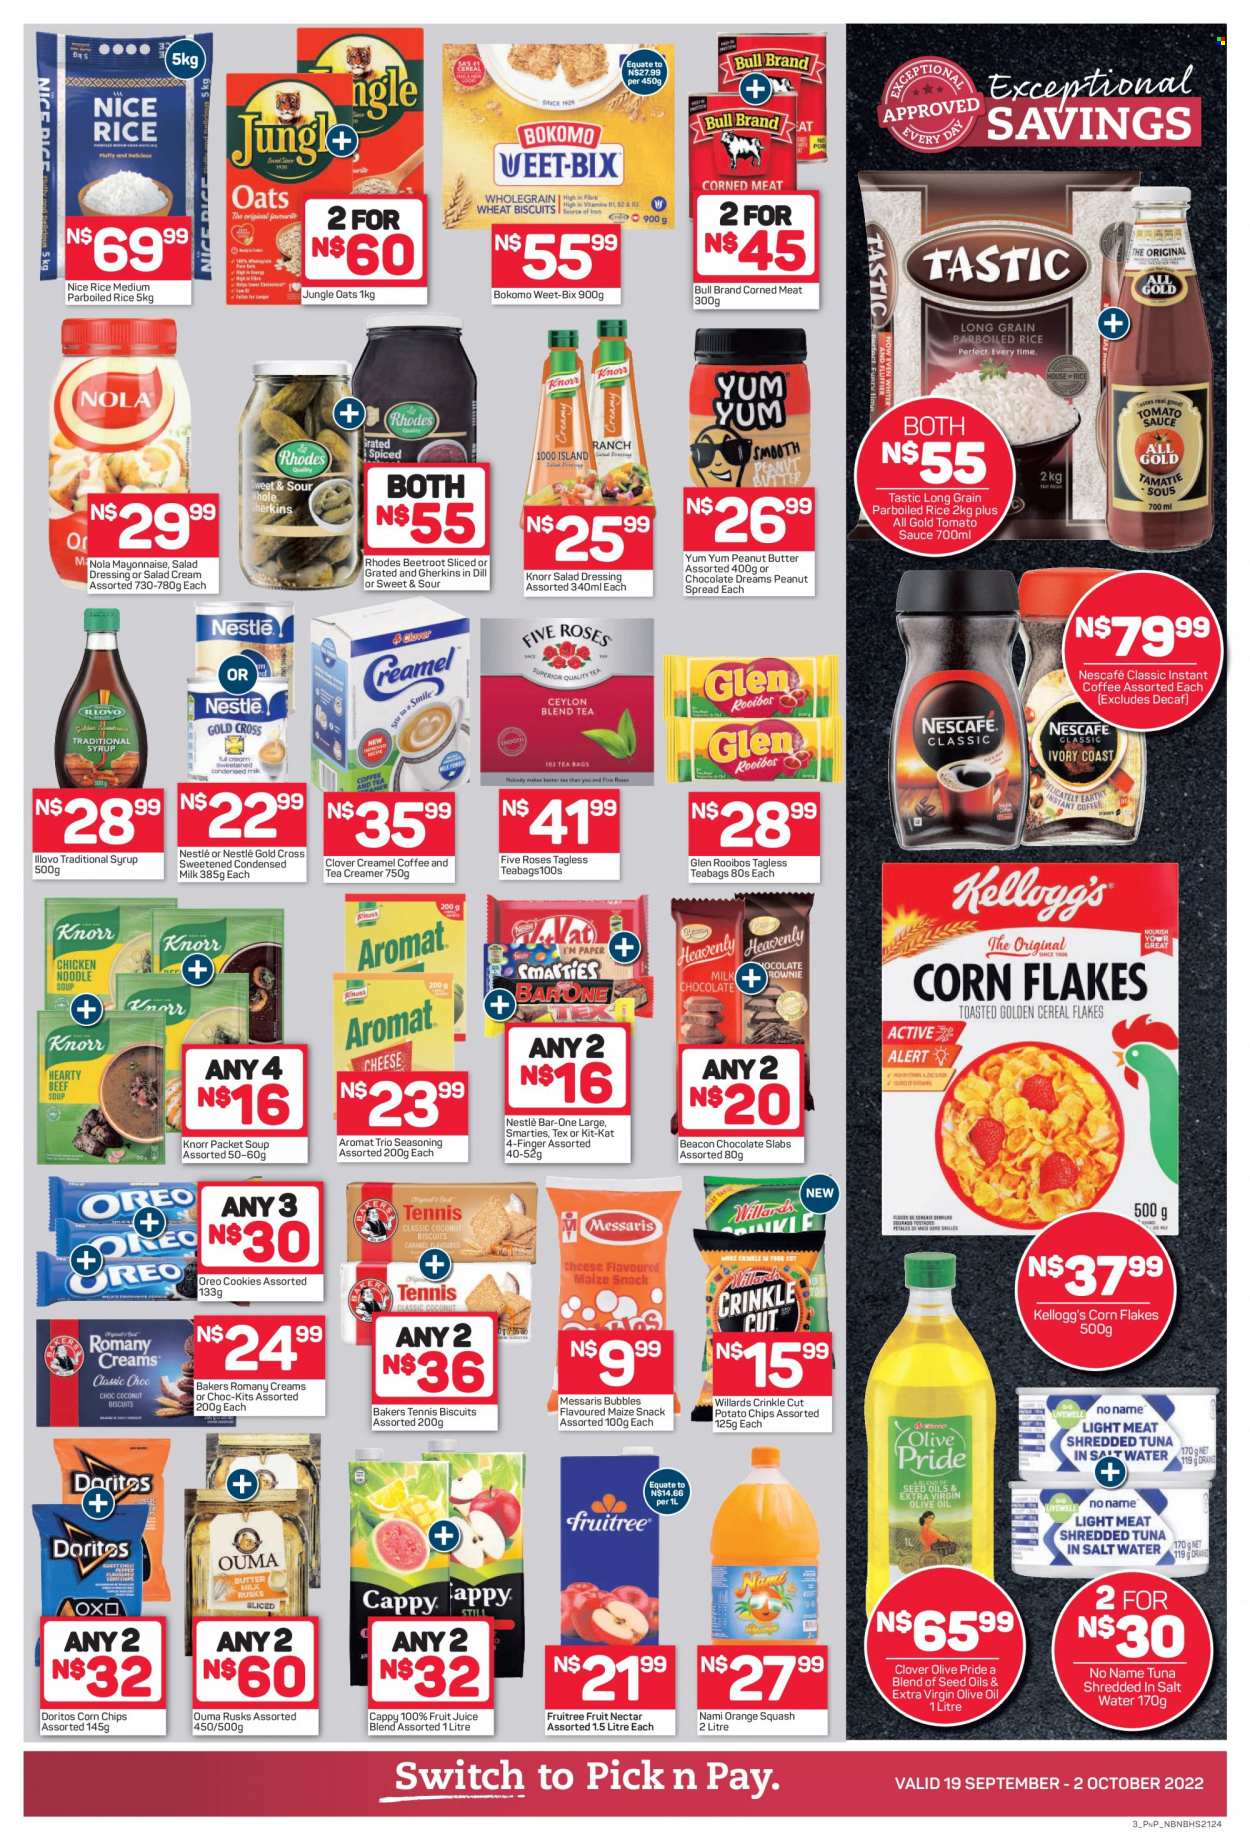 thumbnail - Pick n Pay catalogue  - 19/09/2022 - 02/10/2022 - Sales products - rusks, beetroot, tuna, No Name, soup, Knorr, sauce, Oreo, Clover, milk, condensed milk, creamer, coffee and tea creamer, salad cream, cookies, Nestlé, chocolate, snack, chocolate slabs, Smarties, cereal bar, Kellogg's, biscuit, Doritos, potato chips, chips, corn chips, maize snack, oats, tomato sauce, corned meat, corn flakes, Weet-Bix, jungle oats, rice, parboiled rice, Tastic, dill, spice, salad dressing, dressing, extra virgin olive oil, olive oil, oil, peanut butter, syrup, switch, fruit juice, juice, fruit nectar, orange squash, tea, tea bags, rooibos tea, instant coffee, Nescafé, Bakers. Page 4.